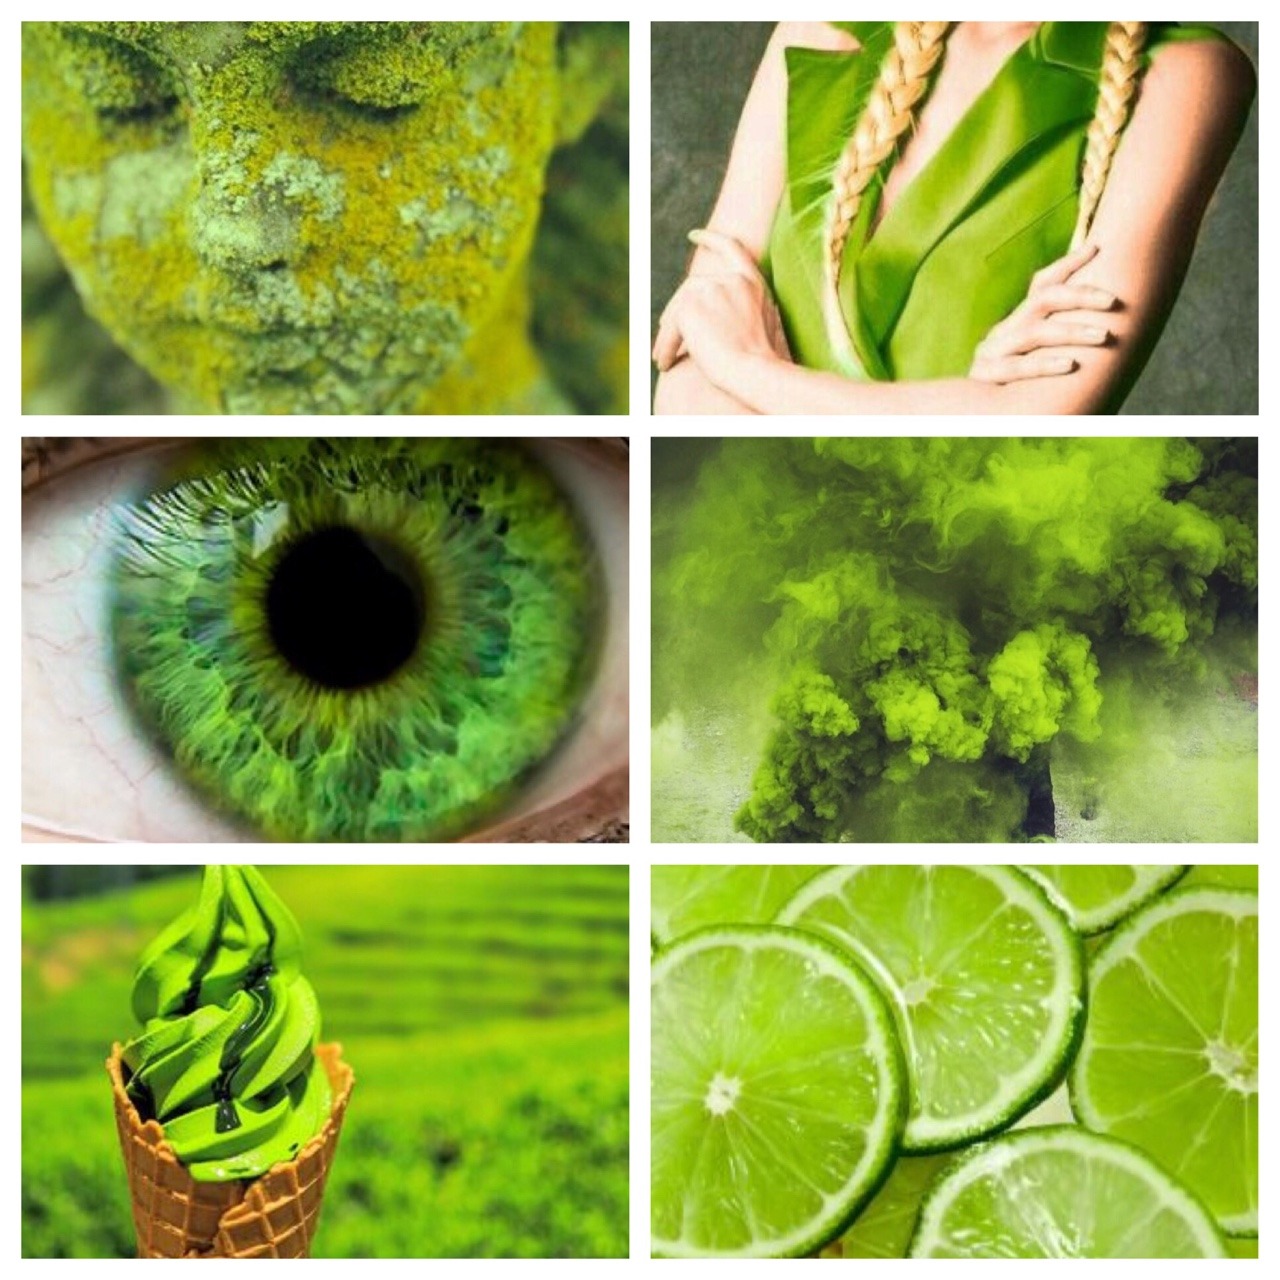 lime green aesthetic on Tumblr